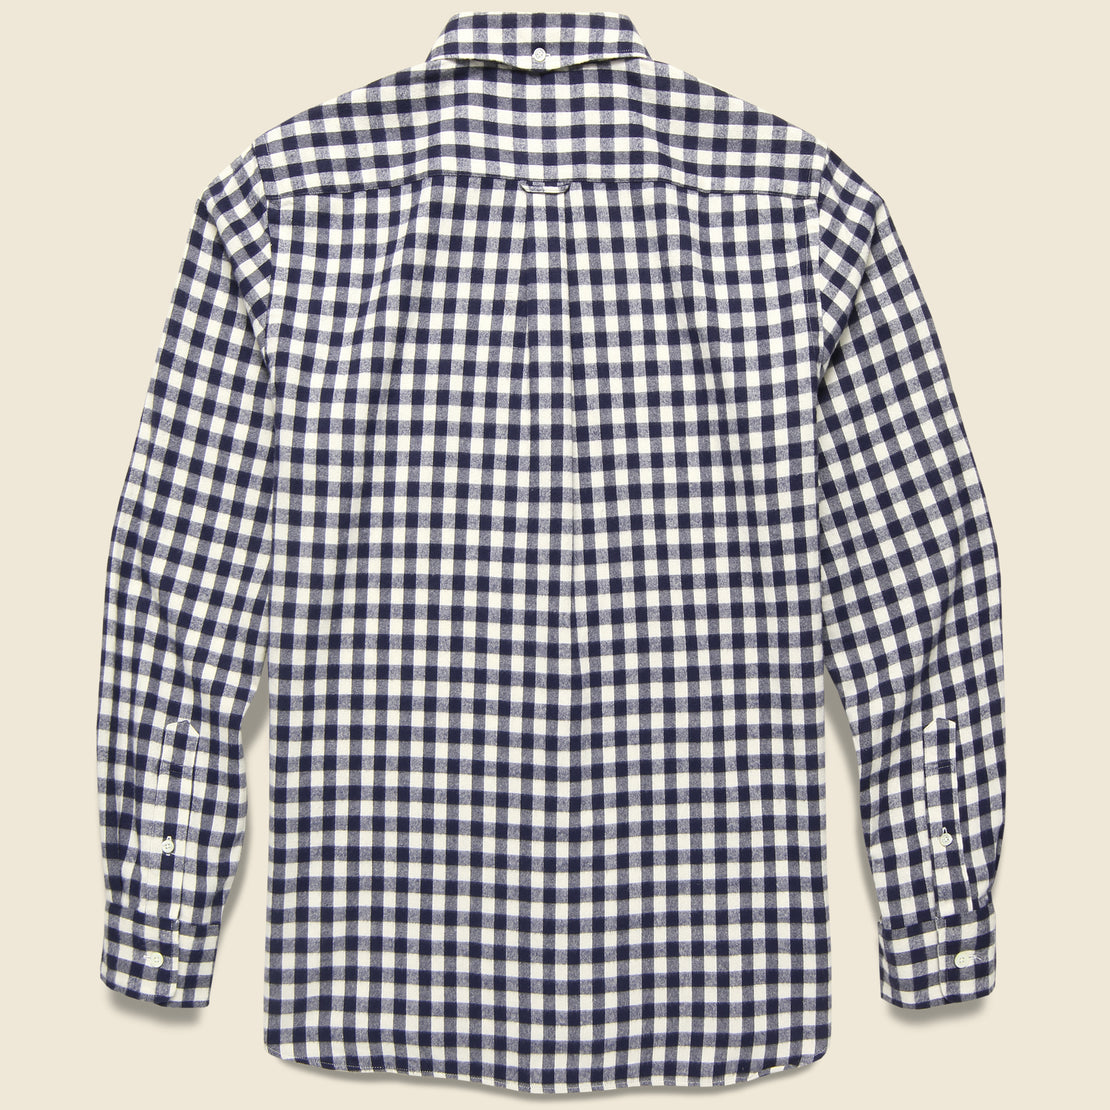 Shaggy Check Shirt - Navy Gingham - BEAMS+ - STAG Provisions - Tops - L/S Woven - Plaid